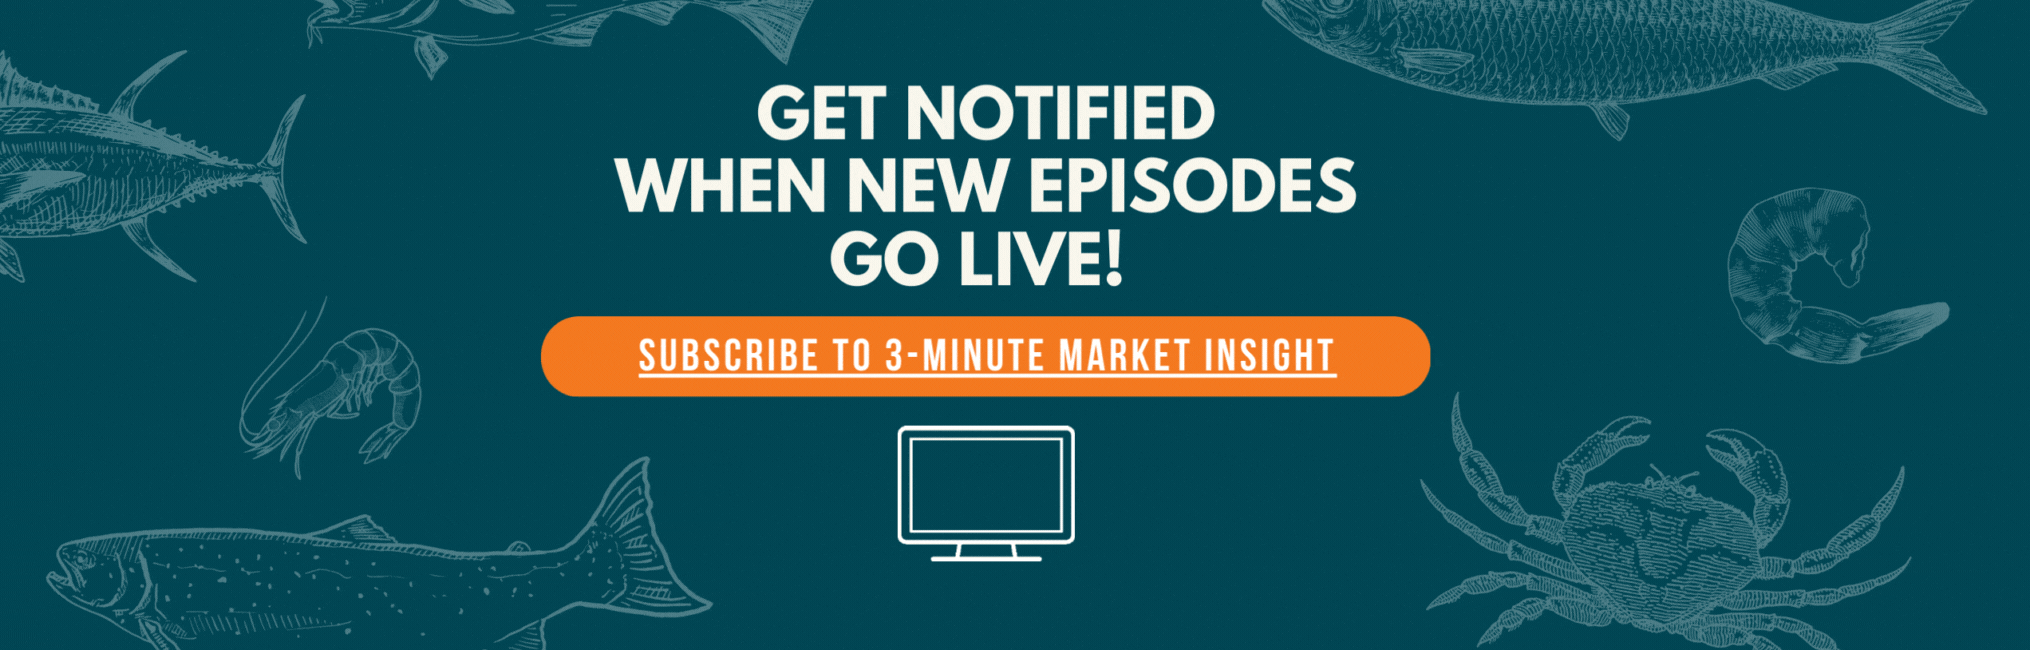 GET NOTIFIED WHEN NEW EPISODE GO LIVE!